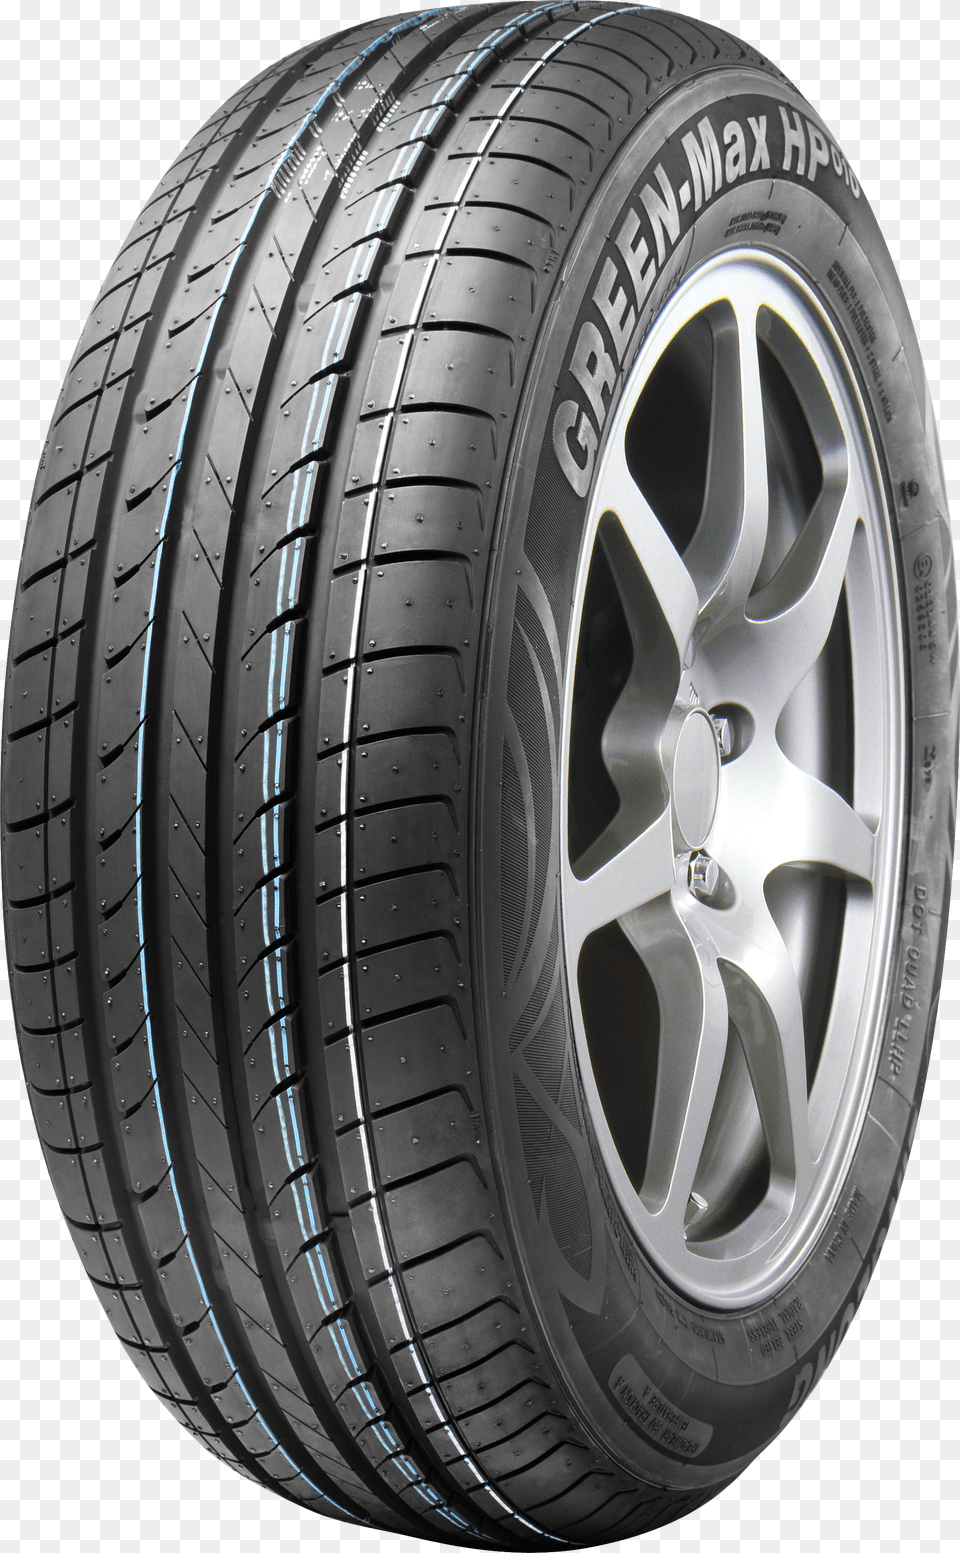 Two Wheeler Tyres Free Transparent Png